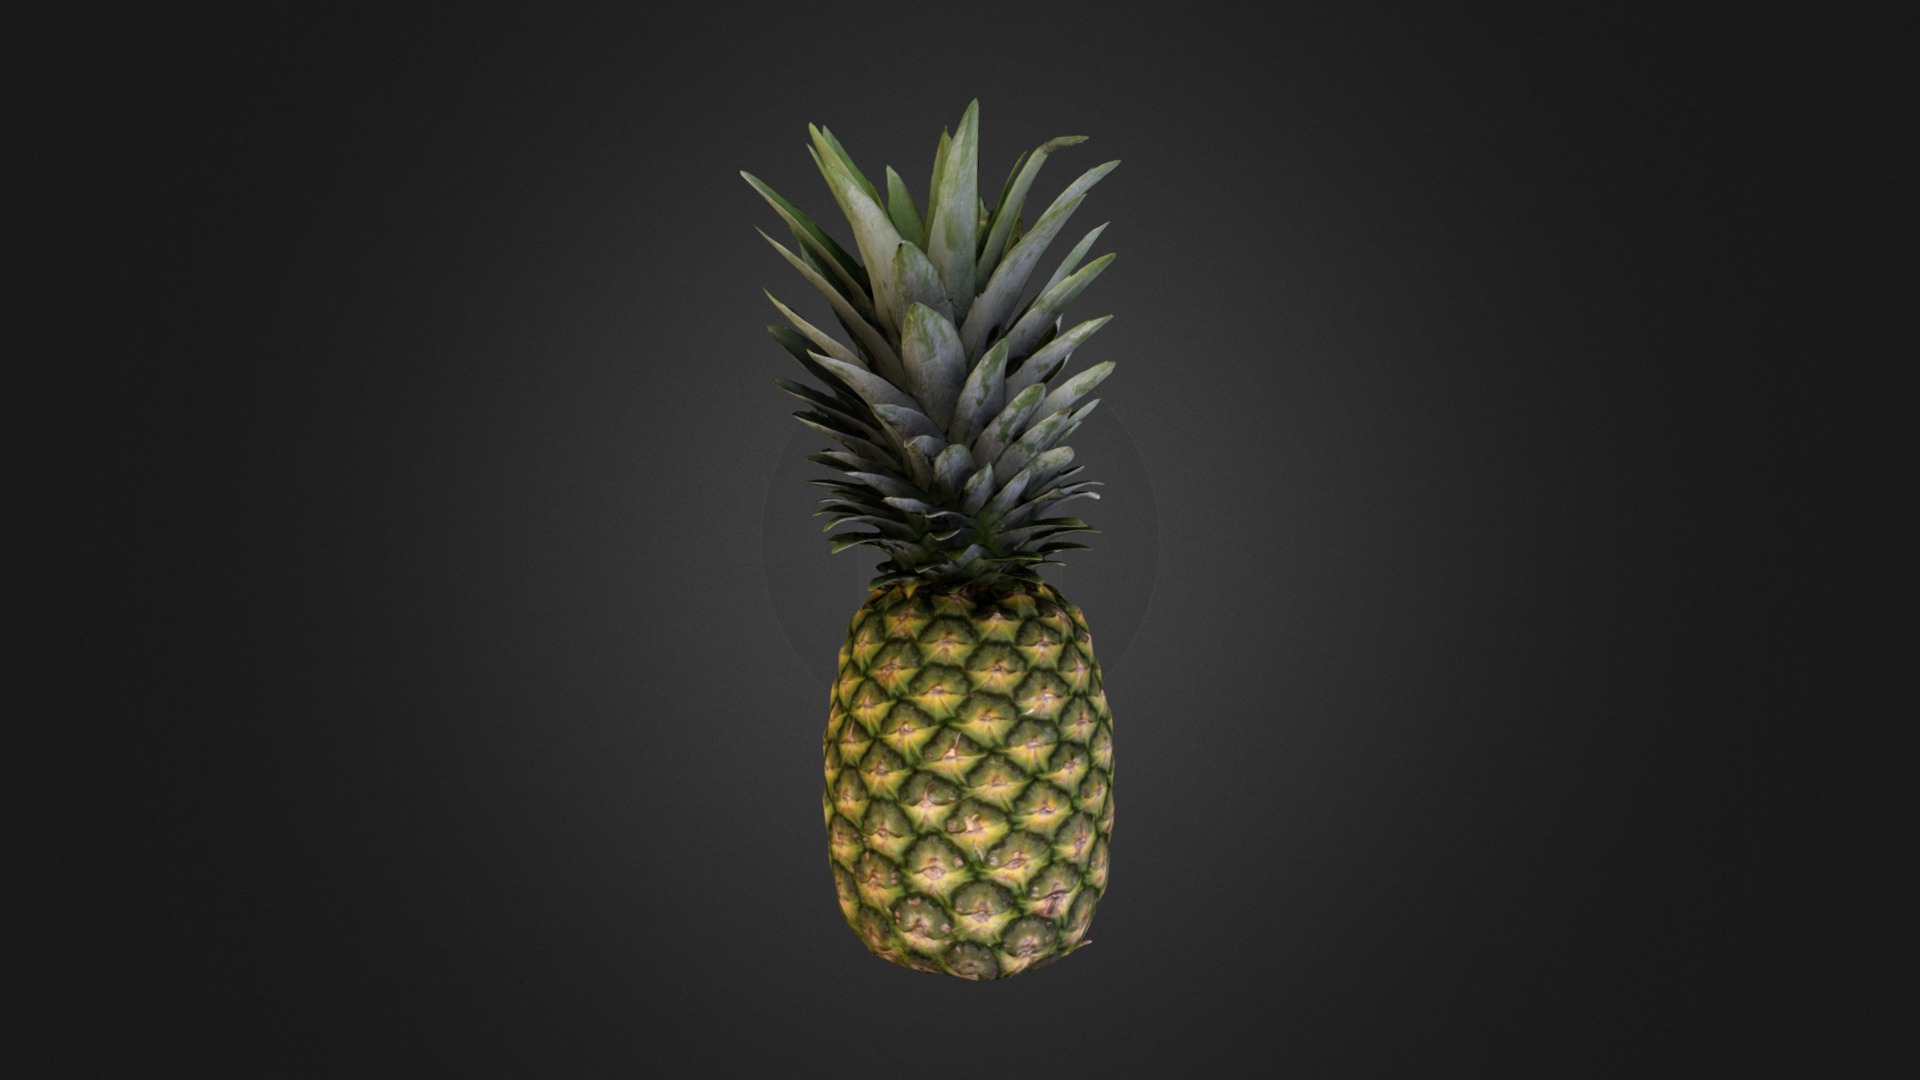 3D model Pineapple (Ananas) - This is a 3D model of the Pineapple (Ananas). The 3D model is about a pineapple with a black background.